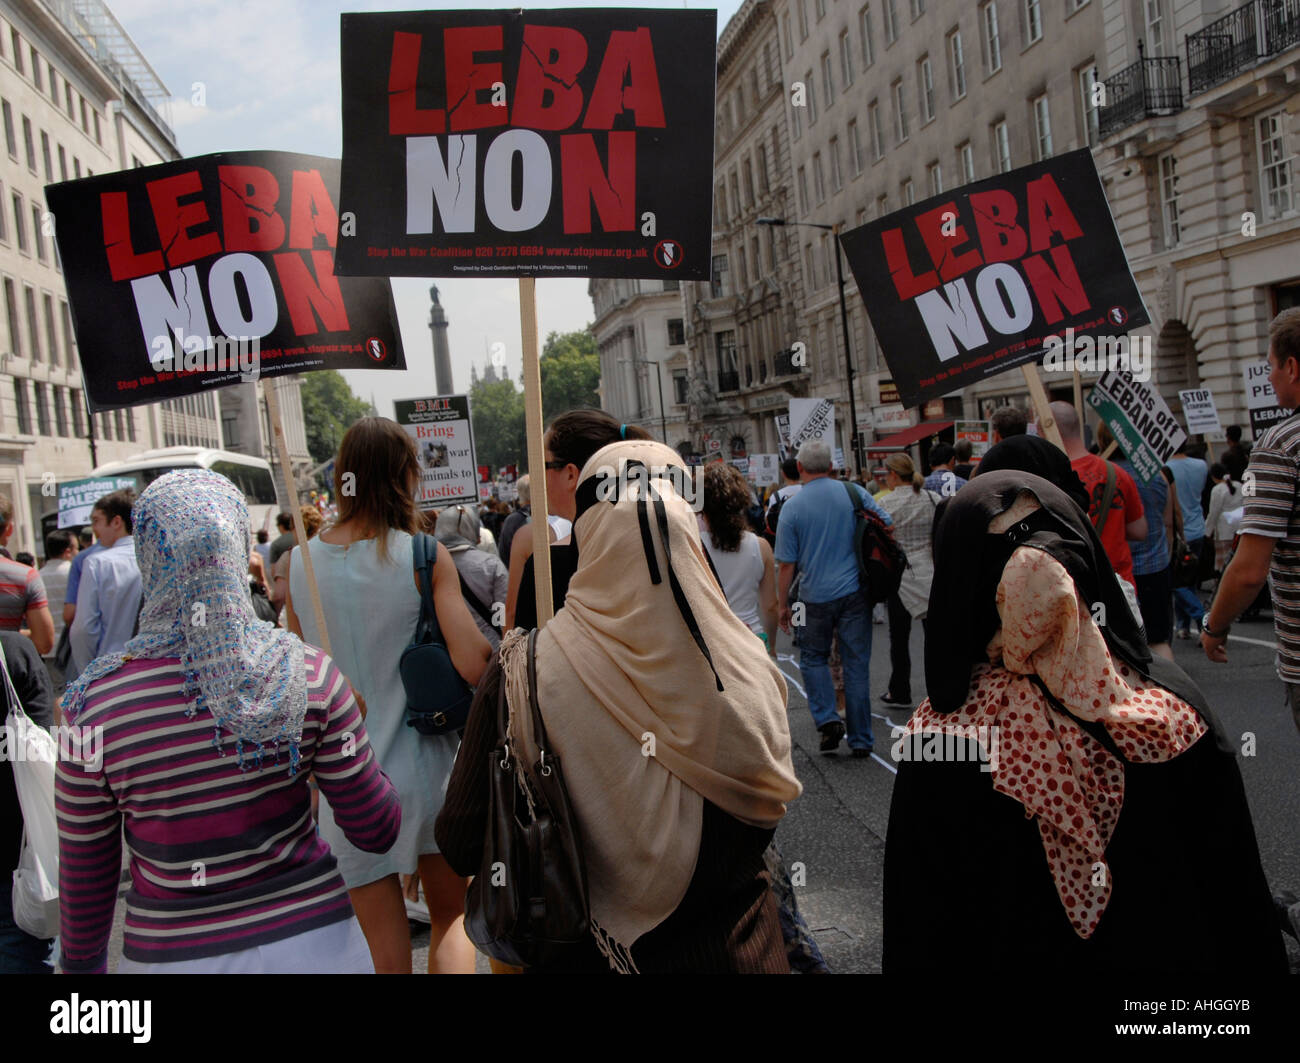 Demonstration in London of about 100,000 people protesting Israeli attack on Lebanon on August 5 2006. Stock Photo